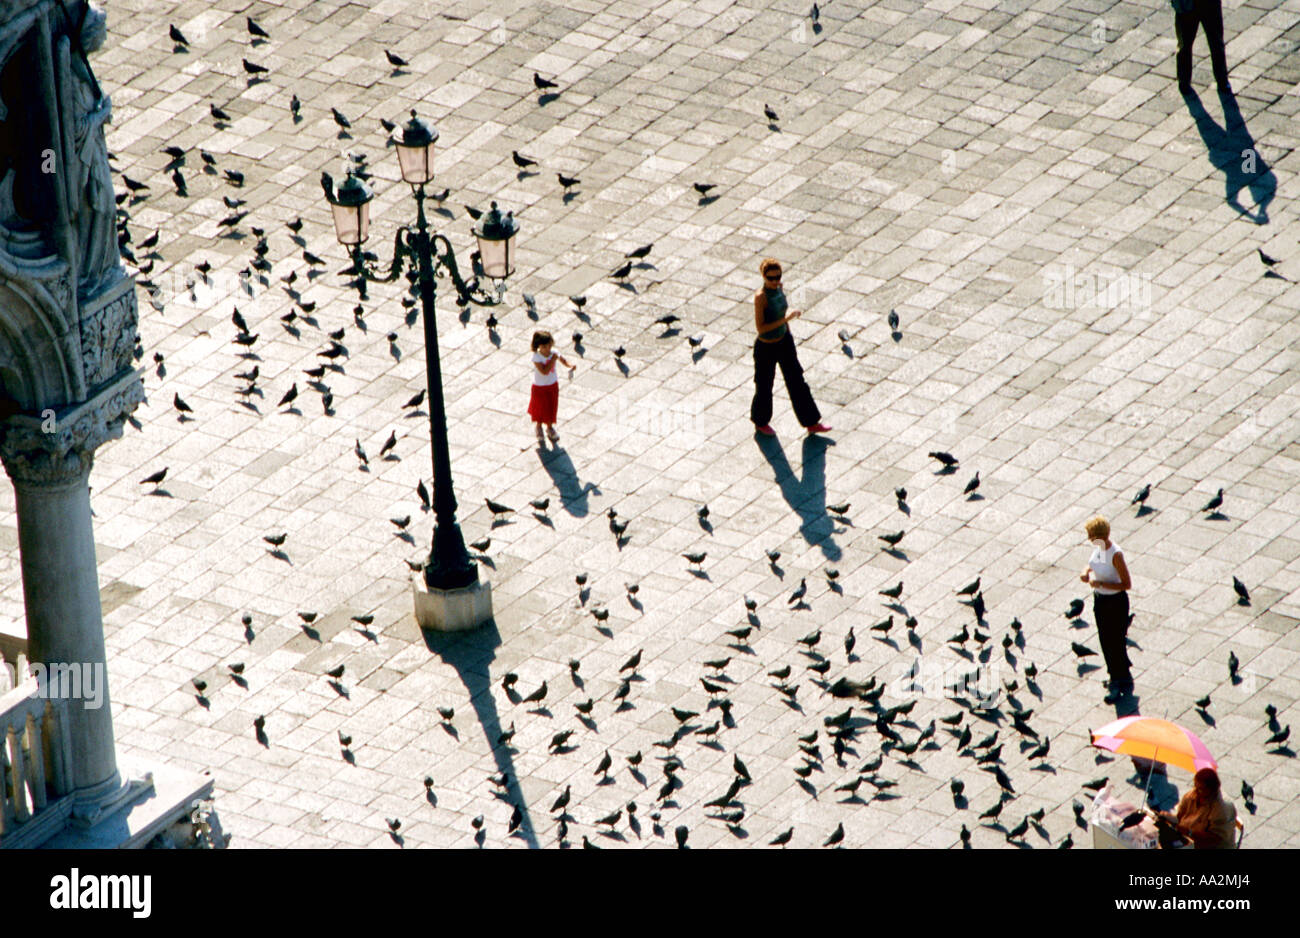 Italy, Venice, little girl with people and pigeons in town square, elevated view Stock Photo